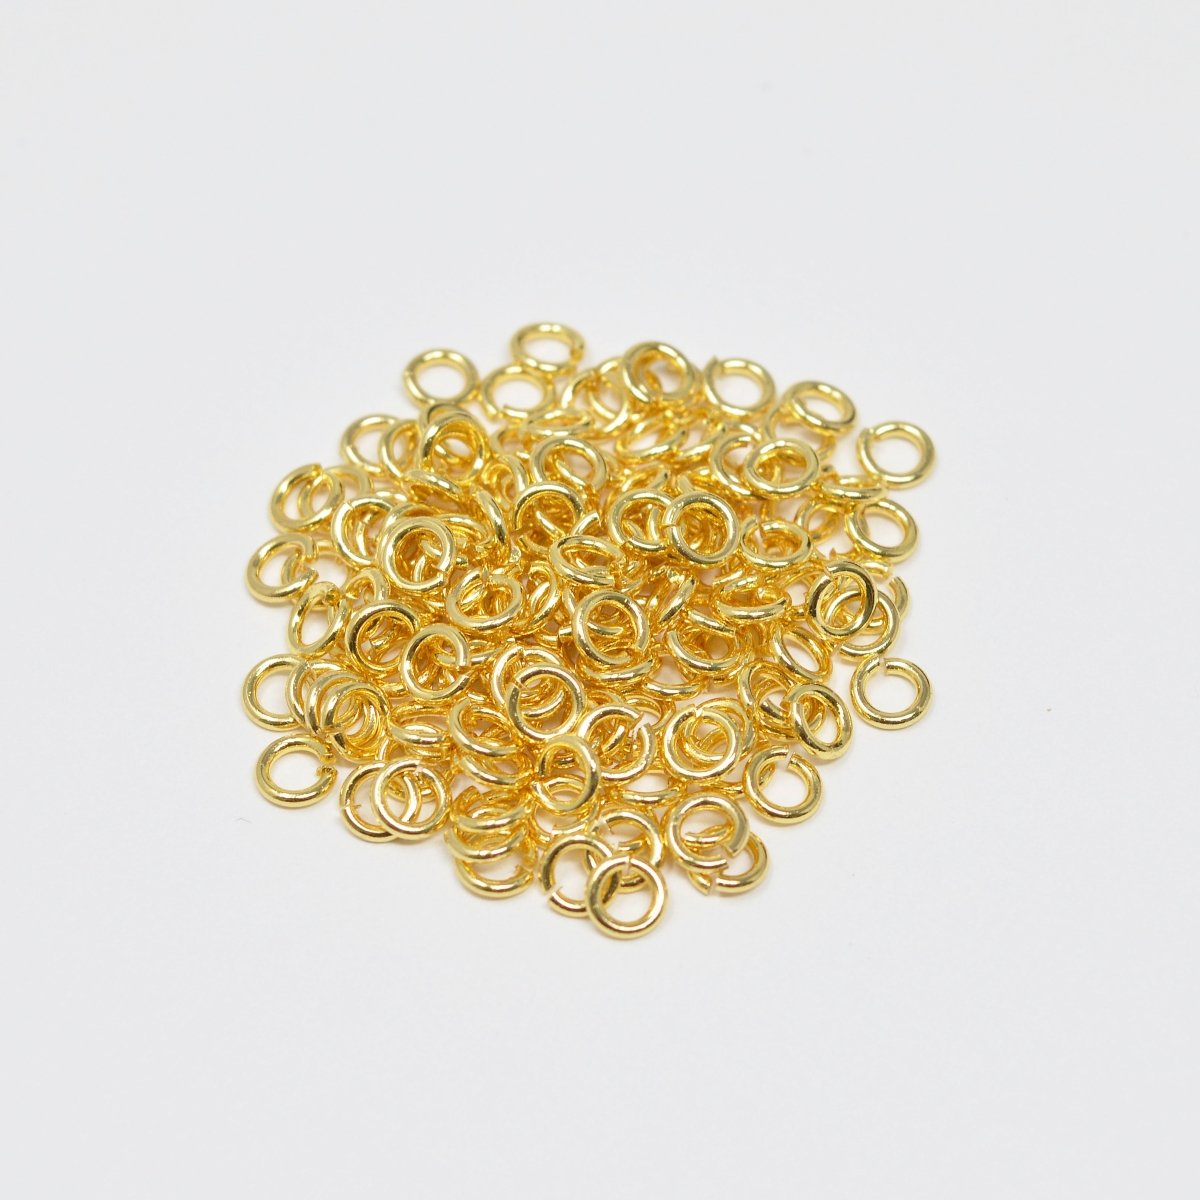 Gold Filled Jump Ring Jewelry Supplies For Jewelry Making Necklace Bracelet L-150 - DLUXCA